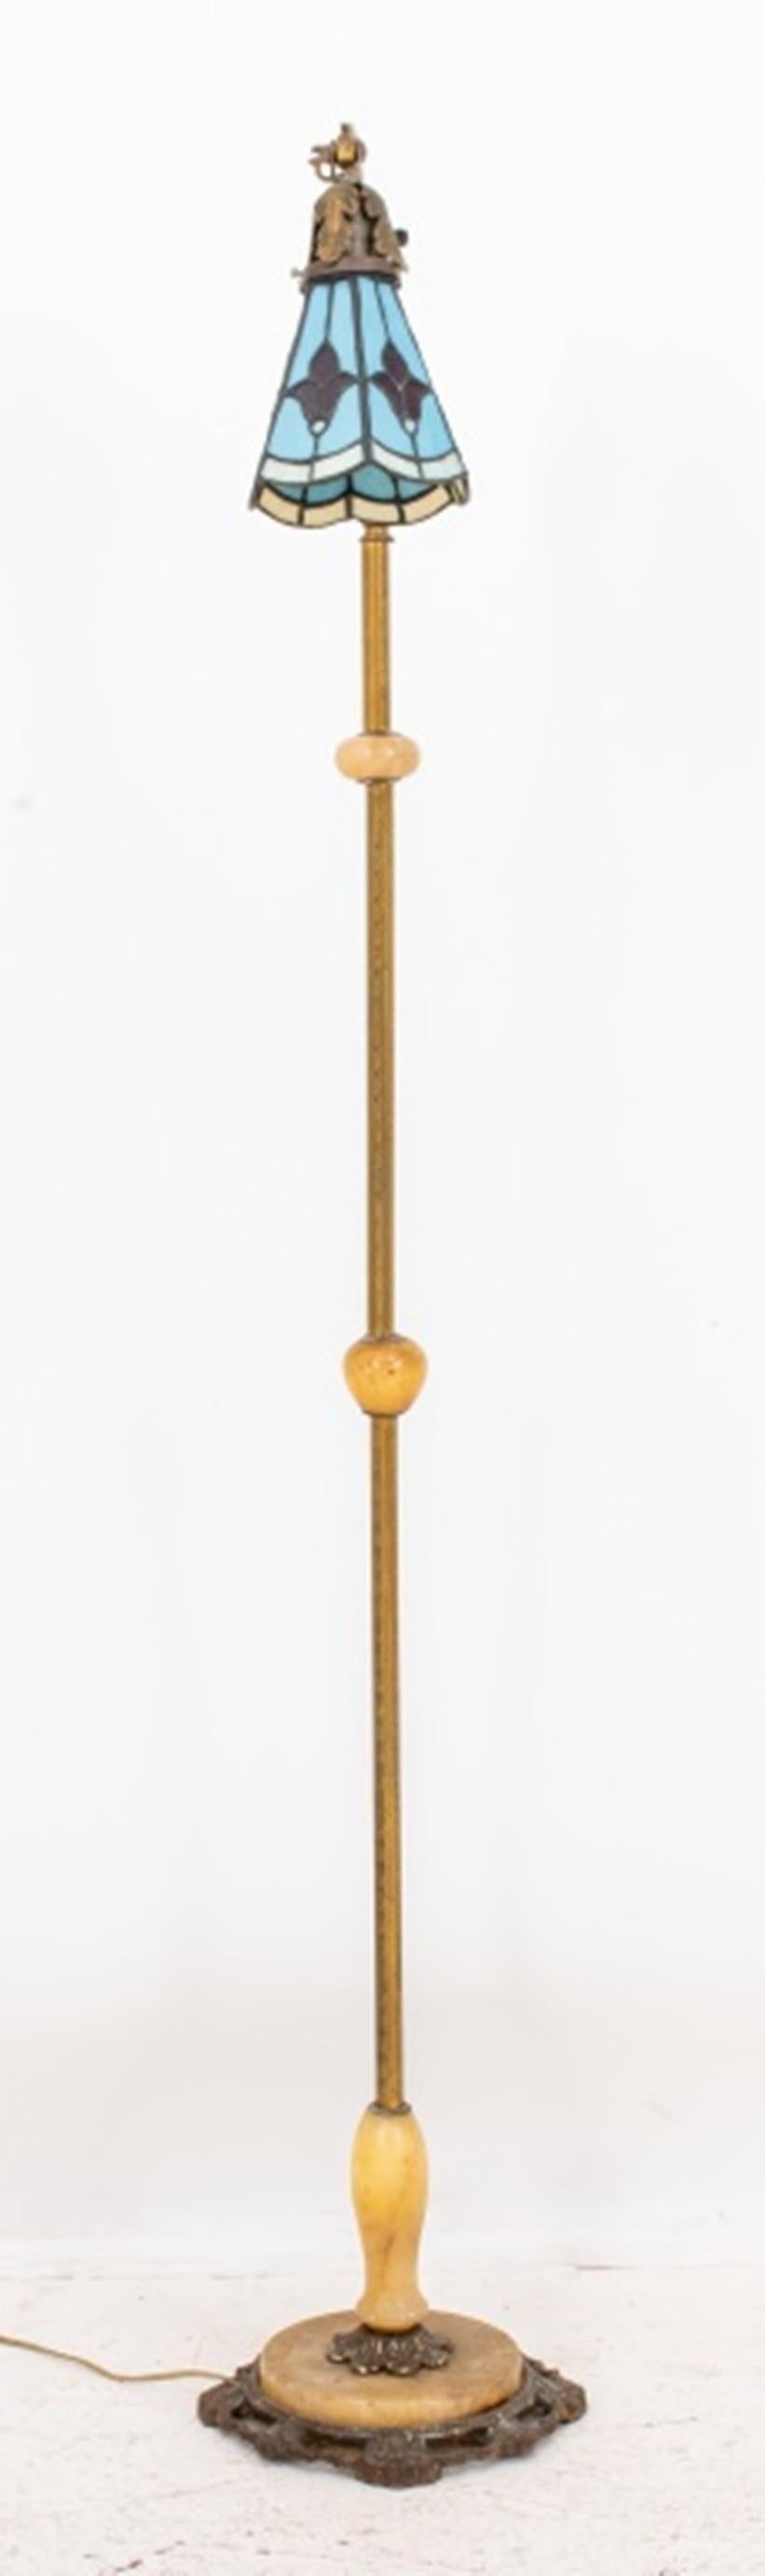 American Brass and Stained Glass Floor Lamp, 1920s 1